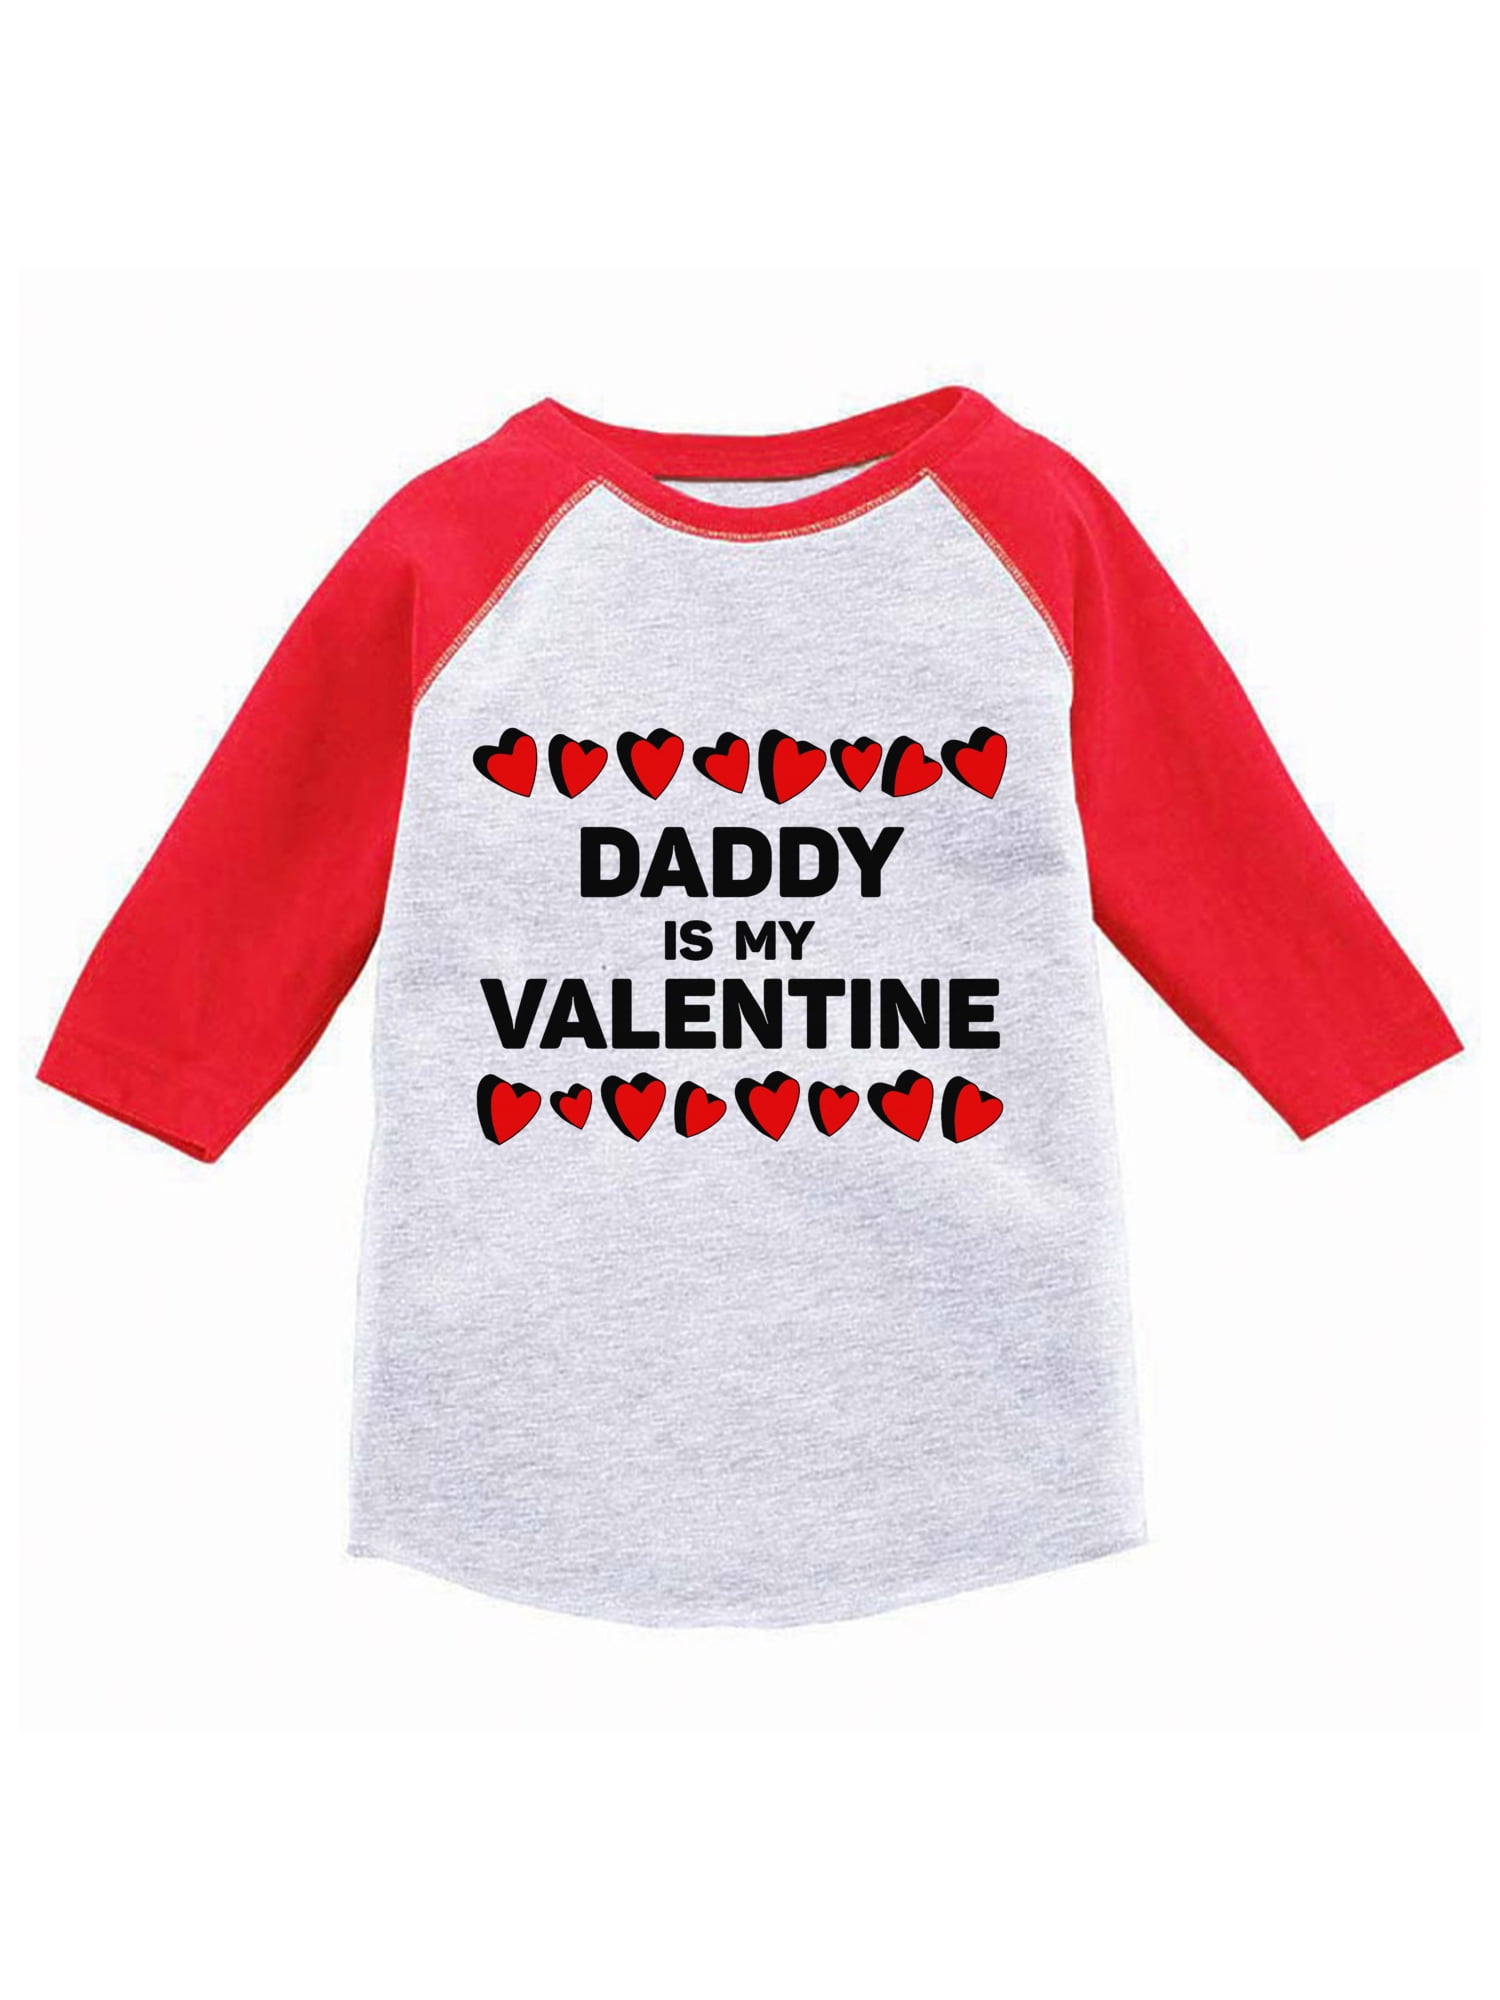 Cute Valentines Day Shirt Daddy Loves Me Daddy's Little Valentine Toddler Shirt Little Valentine Tee